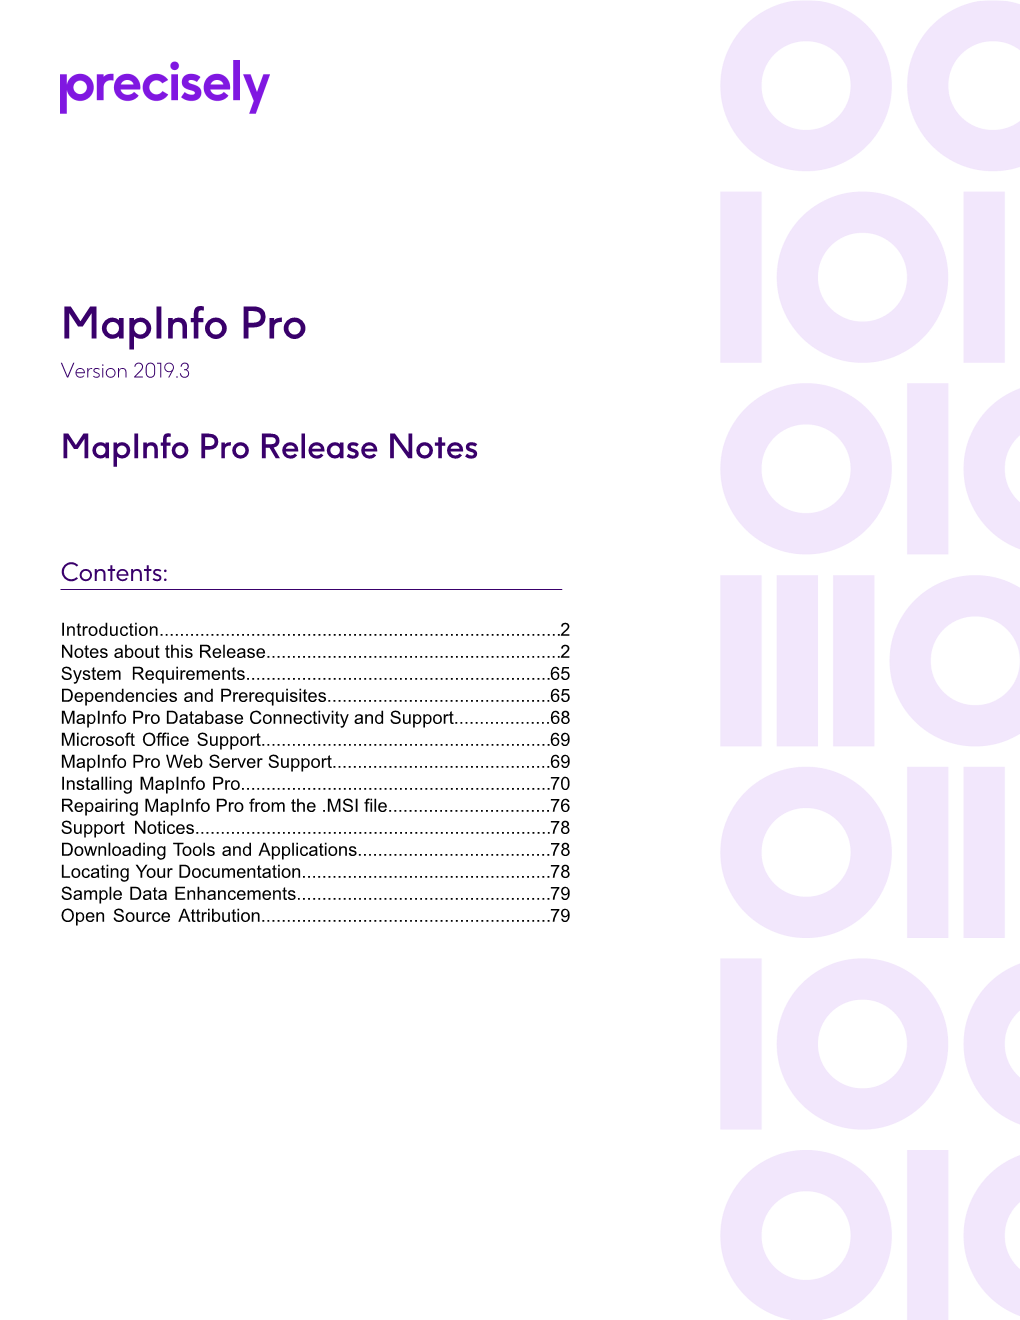 Mapinfo Pro V2019.3 Release Notes